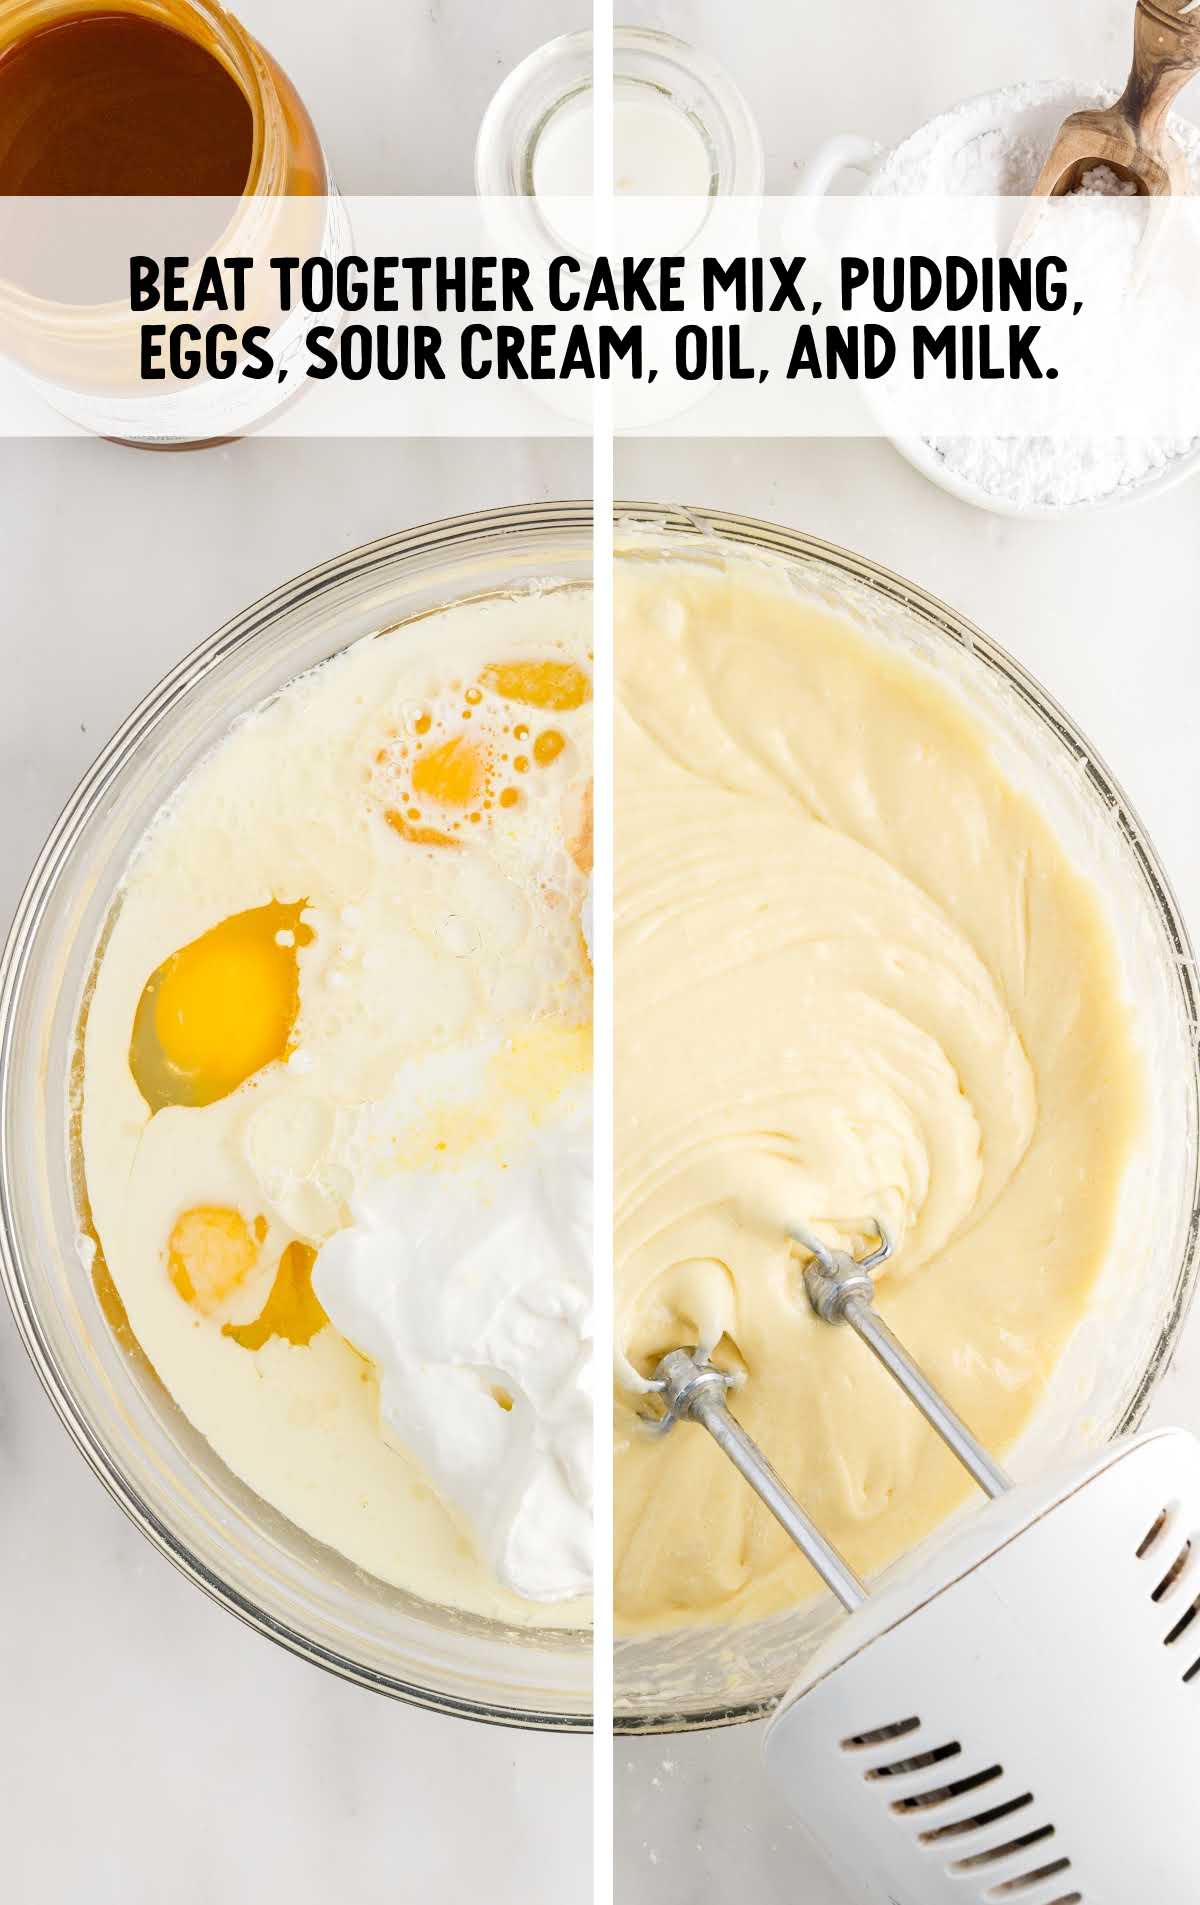 cake mix, pudding, eggs, sour cream, oil, and milk blended together